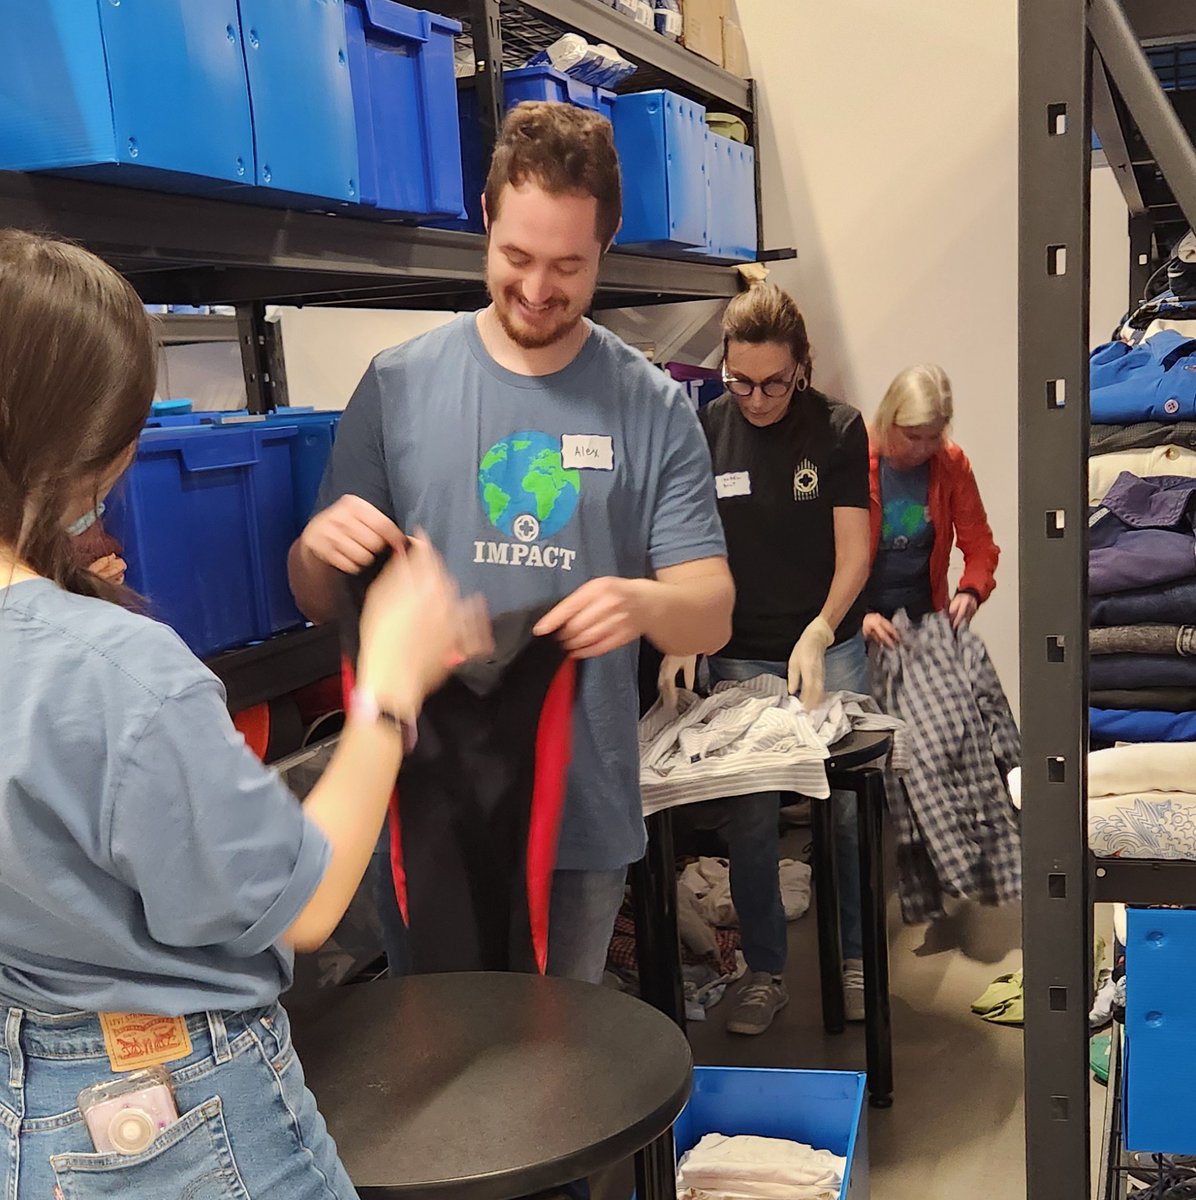 Big applause to our amazing 38 @HPUMC volunteers who lent a helping hand in our clothing storage room & Inclement Weather Shelter! Their dedication of 133 service hours created a positive impact of $3,971. Thank you for joining us to #HelpThemHome! #NationalVolunteerMonth 👏